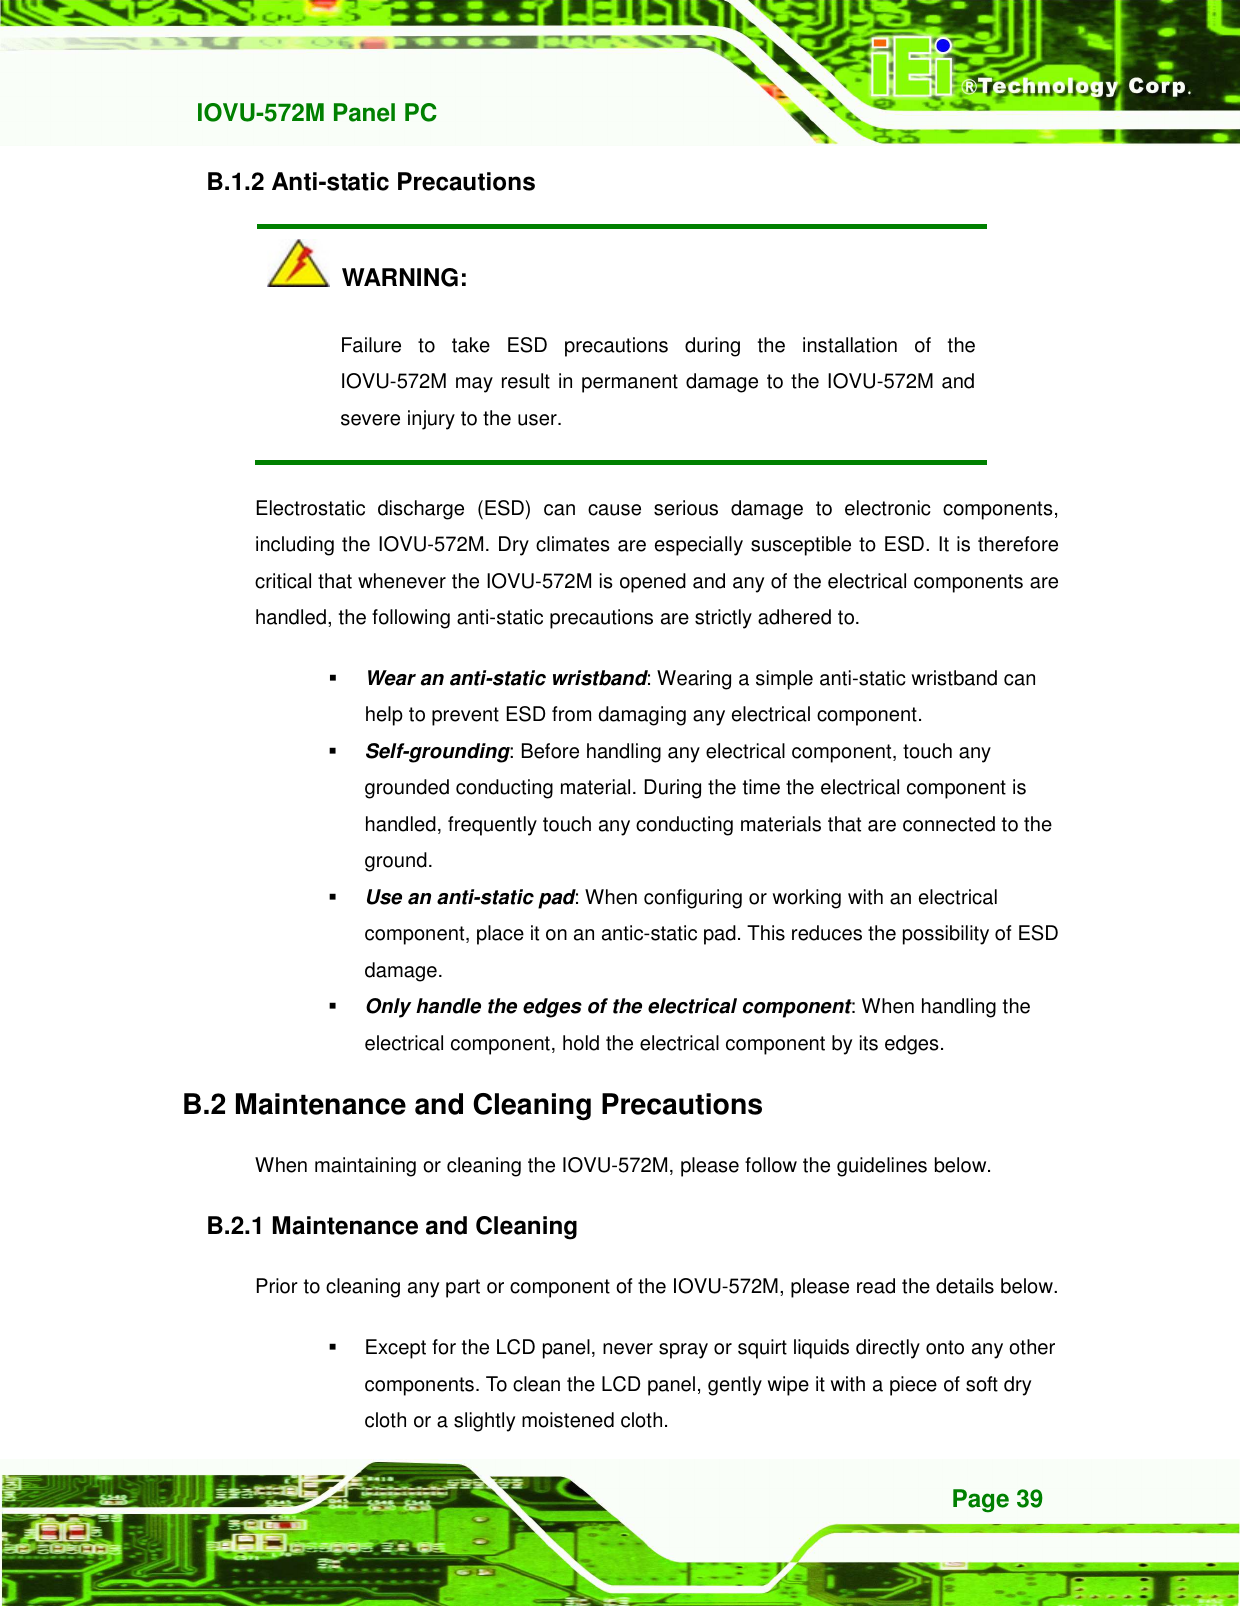   IOVU-572M Panel PC Page 39 B.1.2 Anti-static Precautions   WARNING: Failure  to  take  ESD  precautions  during  the  installation  of  the IOVU-572M may result in permanent damage to the IOVU-572M and severe injury to the user.   Electrostatic  discharge  (ESD)  can  cause  serious  damage  to  electronic  components, including the IOVU-572M. Dry climates are especially susceptible to ESD. It is therefore critical that whenever the IOVU-572M is opened and any of the electrical components are handled, the following anti-static precautions are strictly adhered to.  Wear an anti-static wristband: Wearing a simple anti-static wristband can help to prevent ESD from damaging any electrical component.  Self-grounding: Before handling any electrical component, touch any grounded conducting material. During the time the electrical component is handled, frequently touch any conducting materials that are connected to the ground.  Use an anti-static pad: When configuring or working with an electrical component, place it on an antic-static pad. This reduces the possibility of ESD damage.  Only handle the edges of the electrical component: When handling the electrical component, hold the electrical component by its edges. B.2 Maintenance and Cleaning Precautions When maintaining or cleaning the IOVU-572M, please follow the guidelines below. B.2.1 Maintenance and Cleaning Prior to cleaning any part or component of the IOVU-572M, please read the details below.   Except for the LCD panel, never spray or squirt liquids directly onto any other components. To clean the LCD panel, gently wipe it with a piece of soft dry cloth or a slightly moistened cloth. 